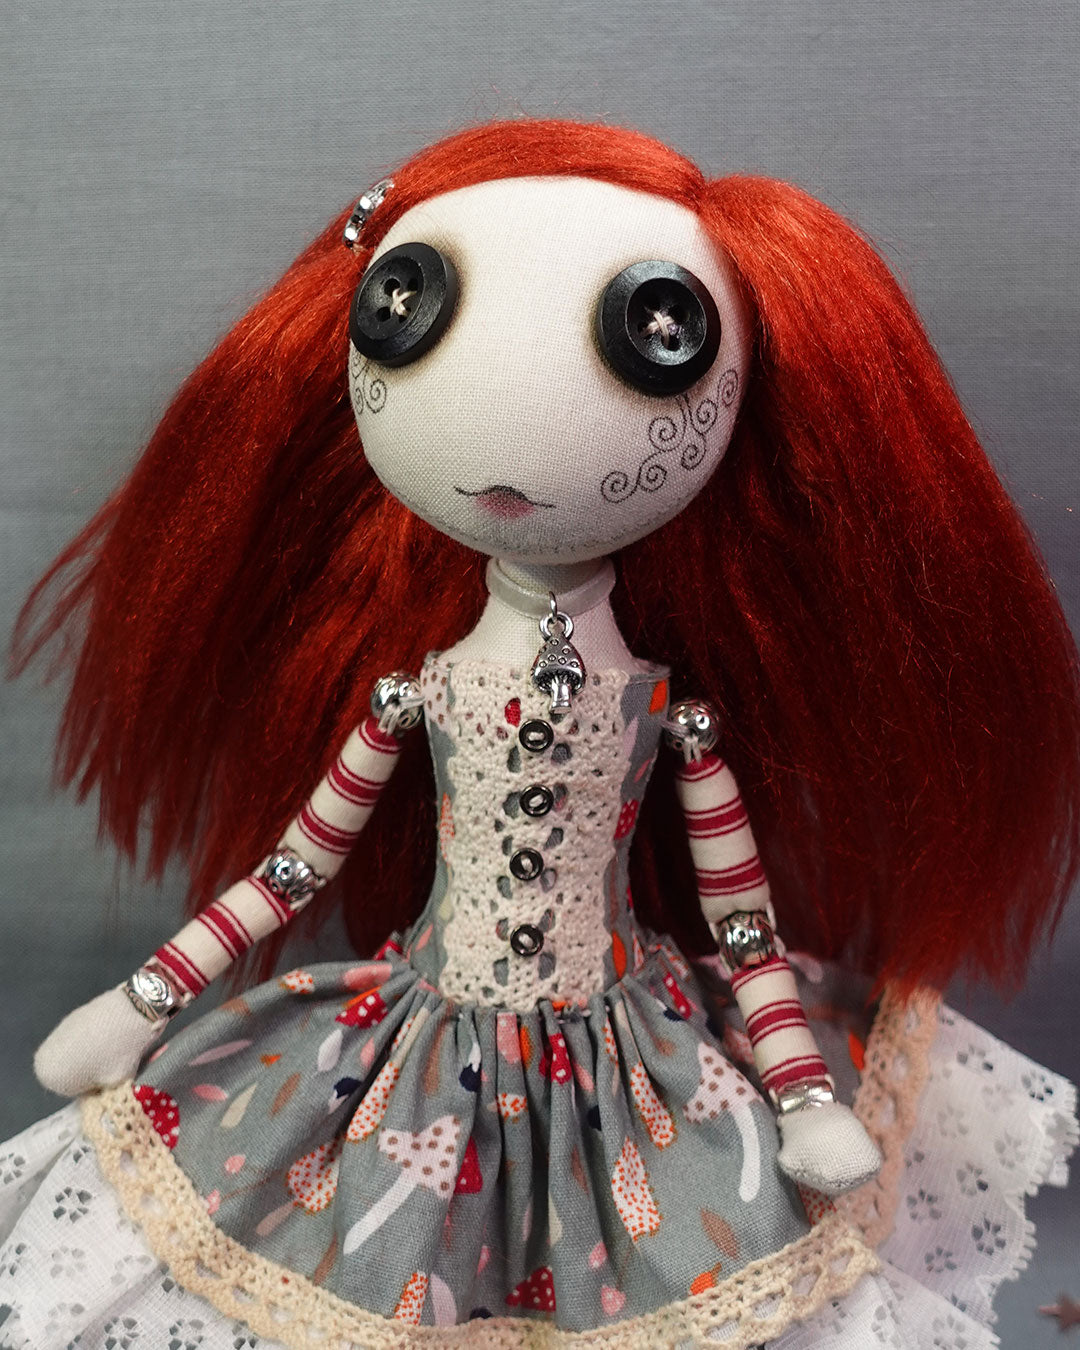 a button eyed cloth art doll with long red hair and mushroom print dress